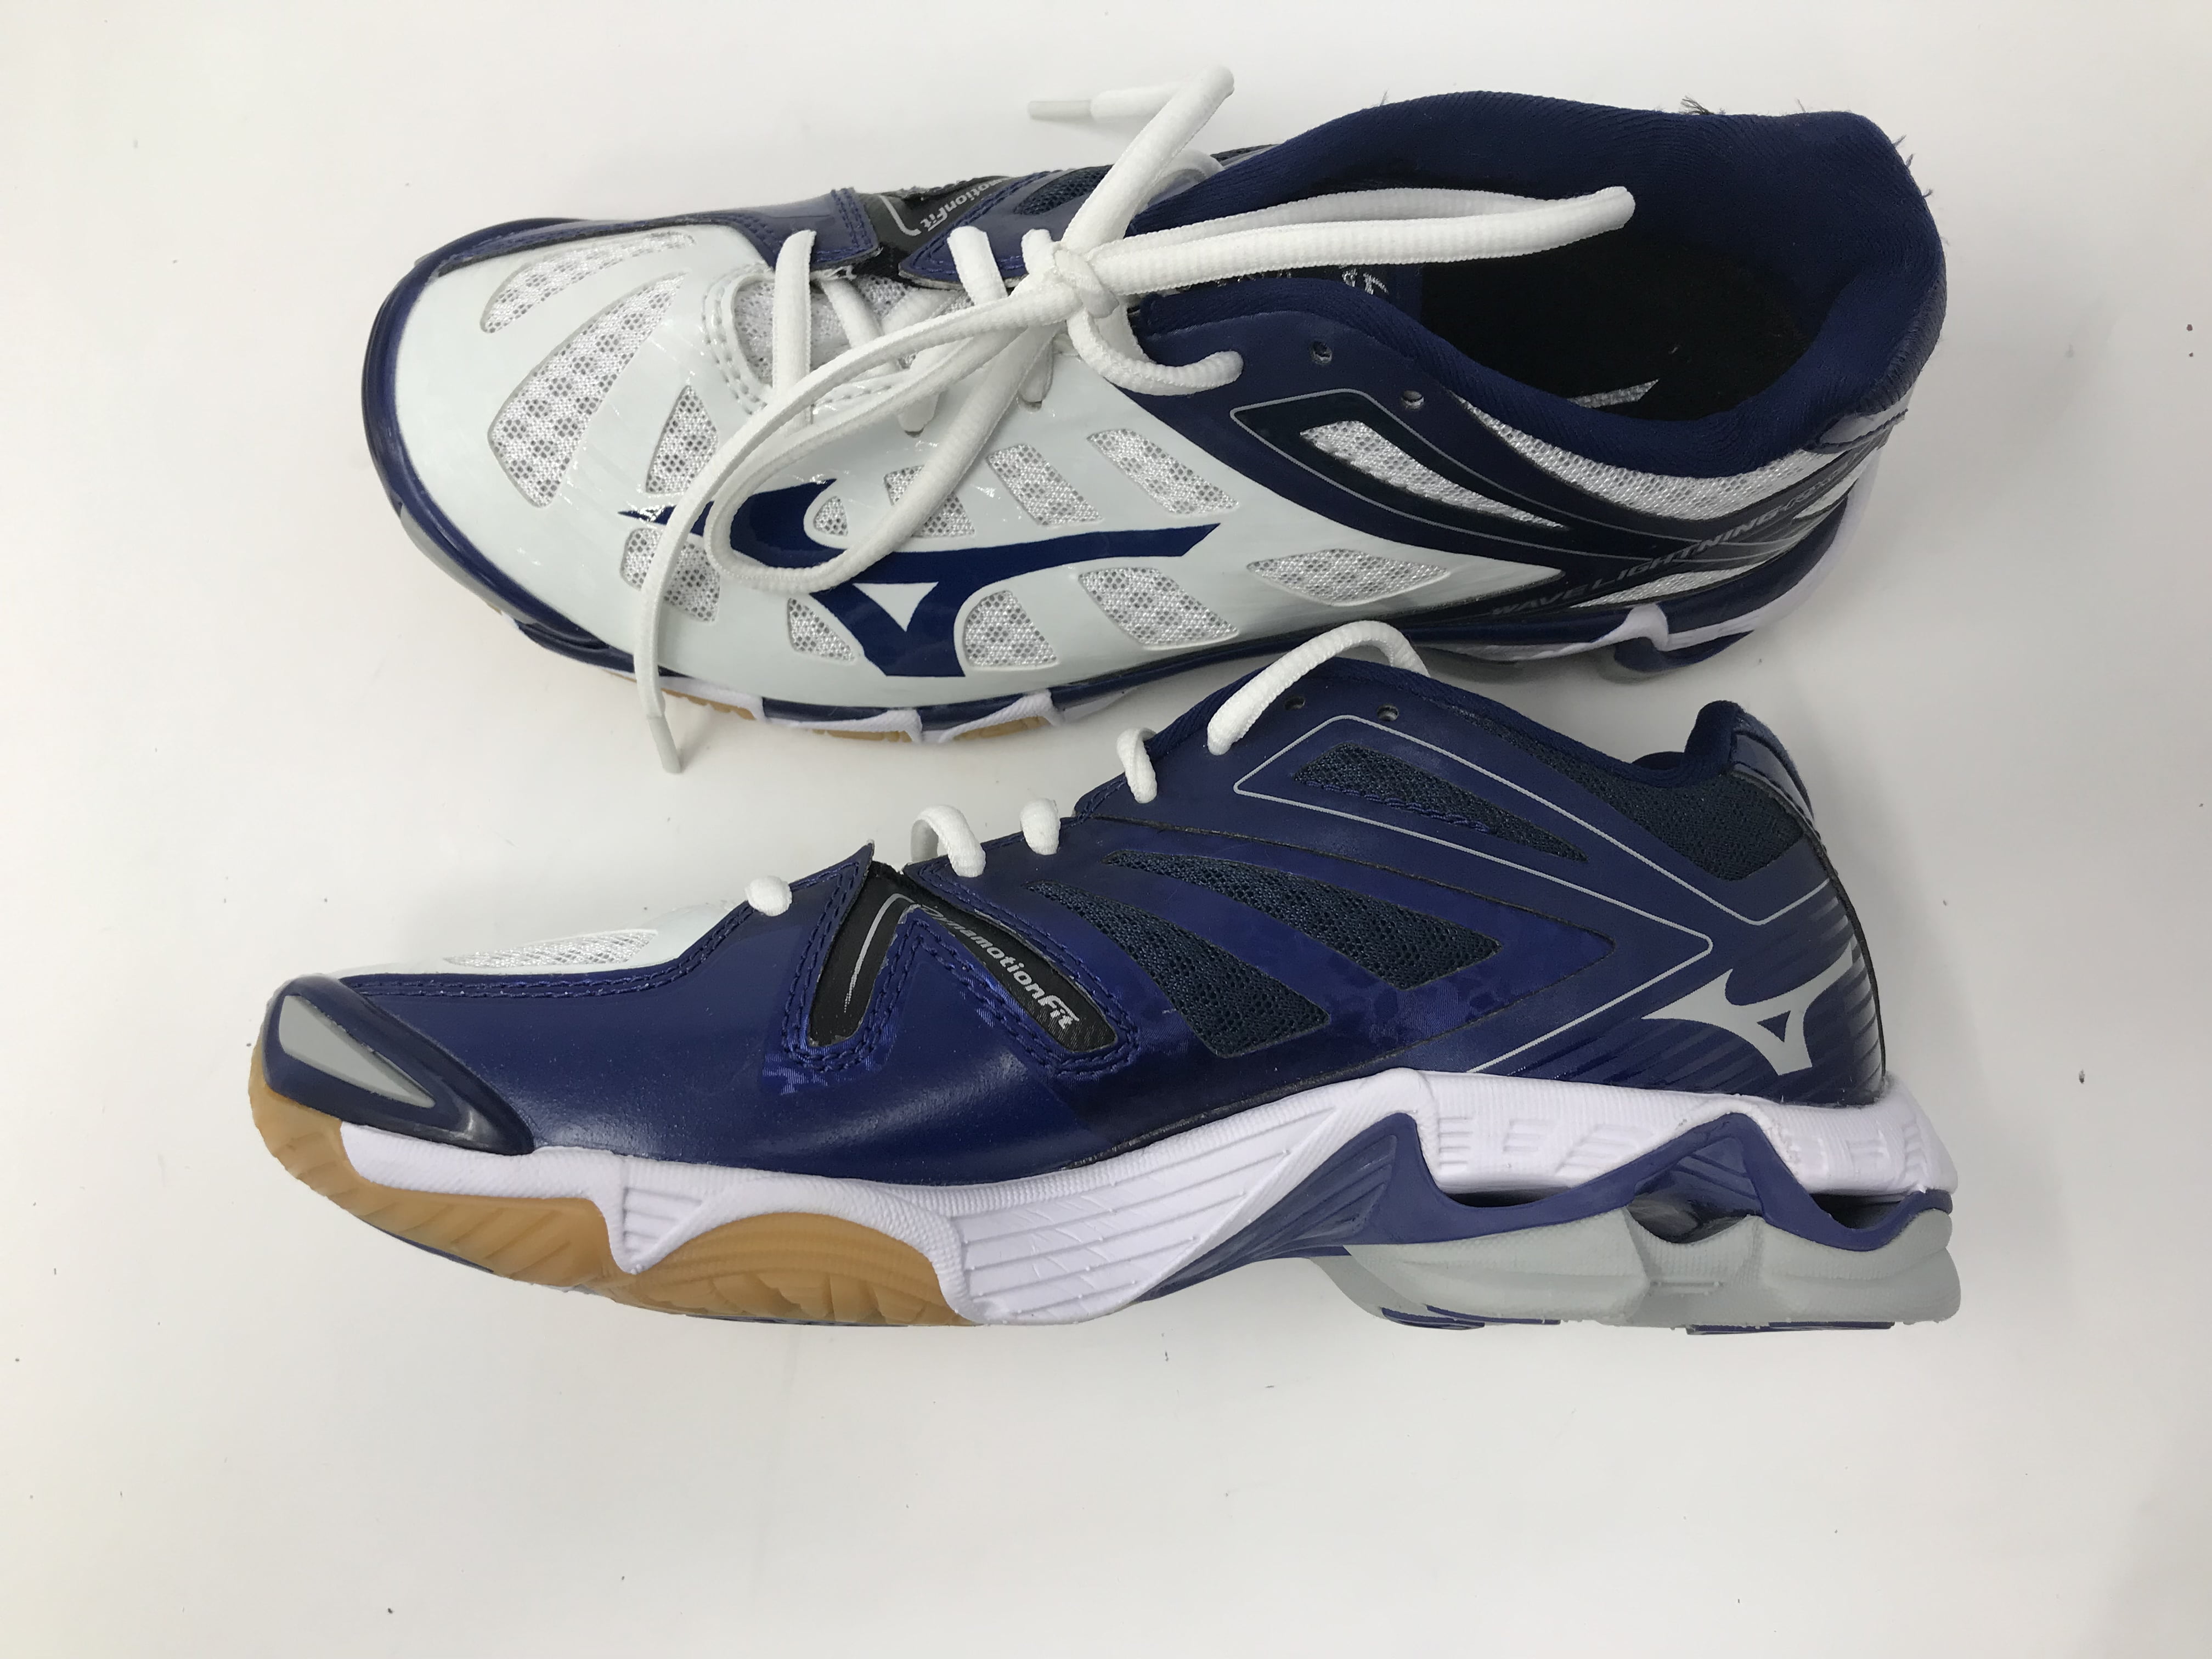 New Mizuno Wave Lightning RX3 Volleyball Shoes Navy/White Womens Size 7  430168 - Walmart.com